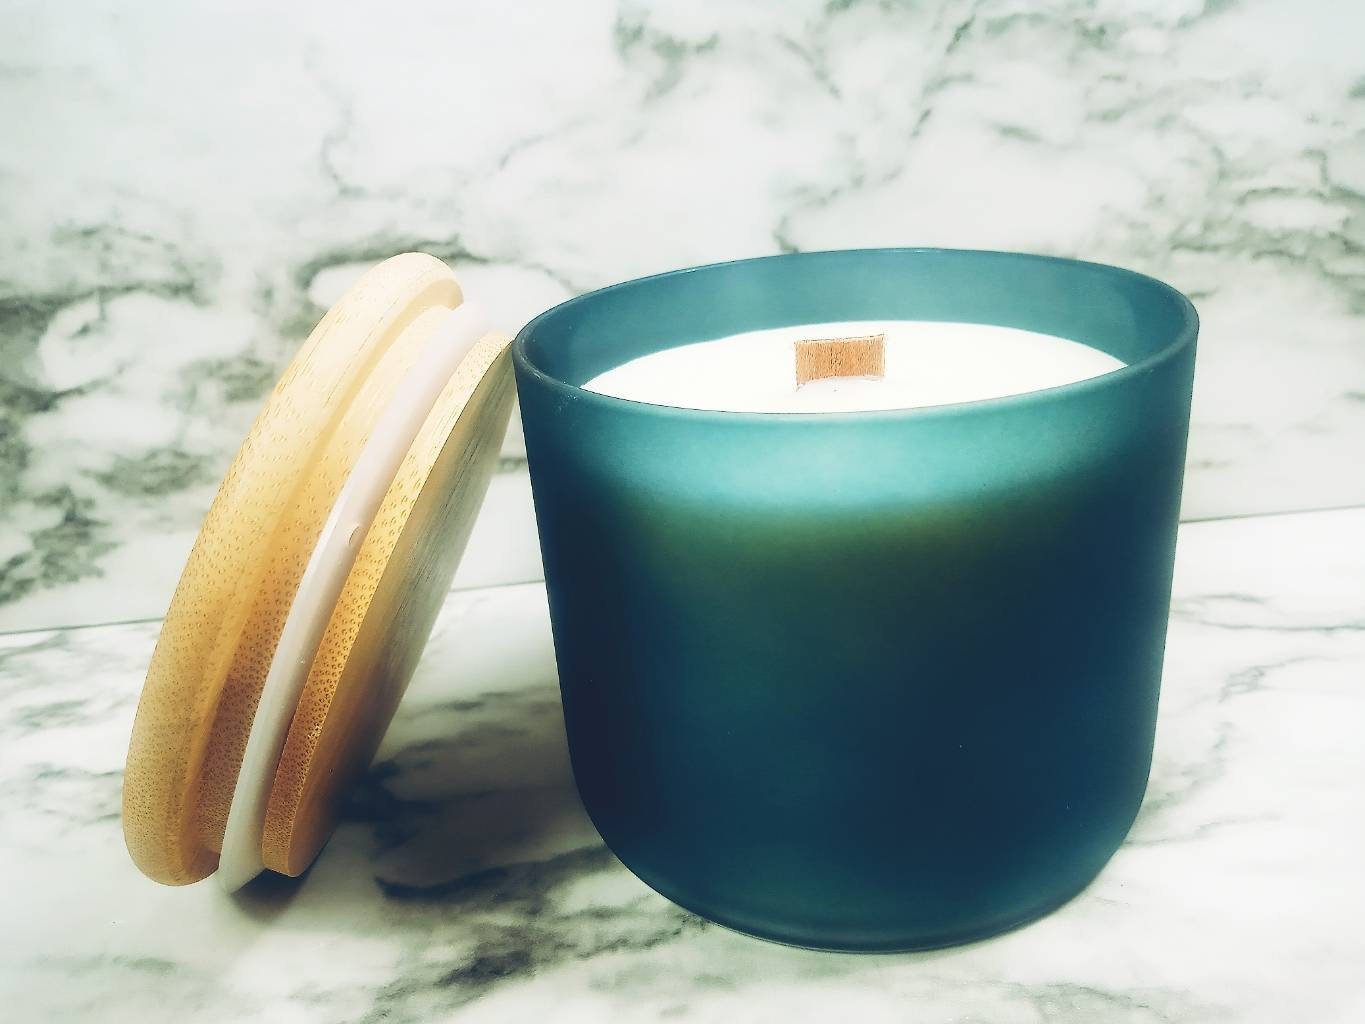 Refillable Decorative Glass Woodwick Soy Candles